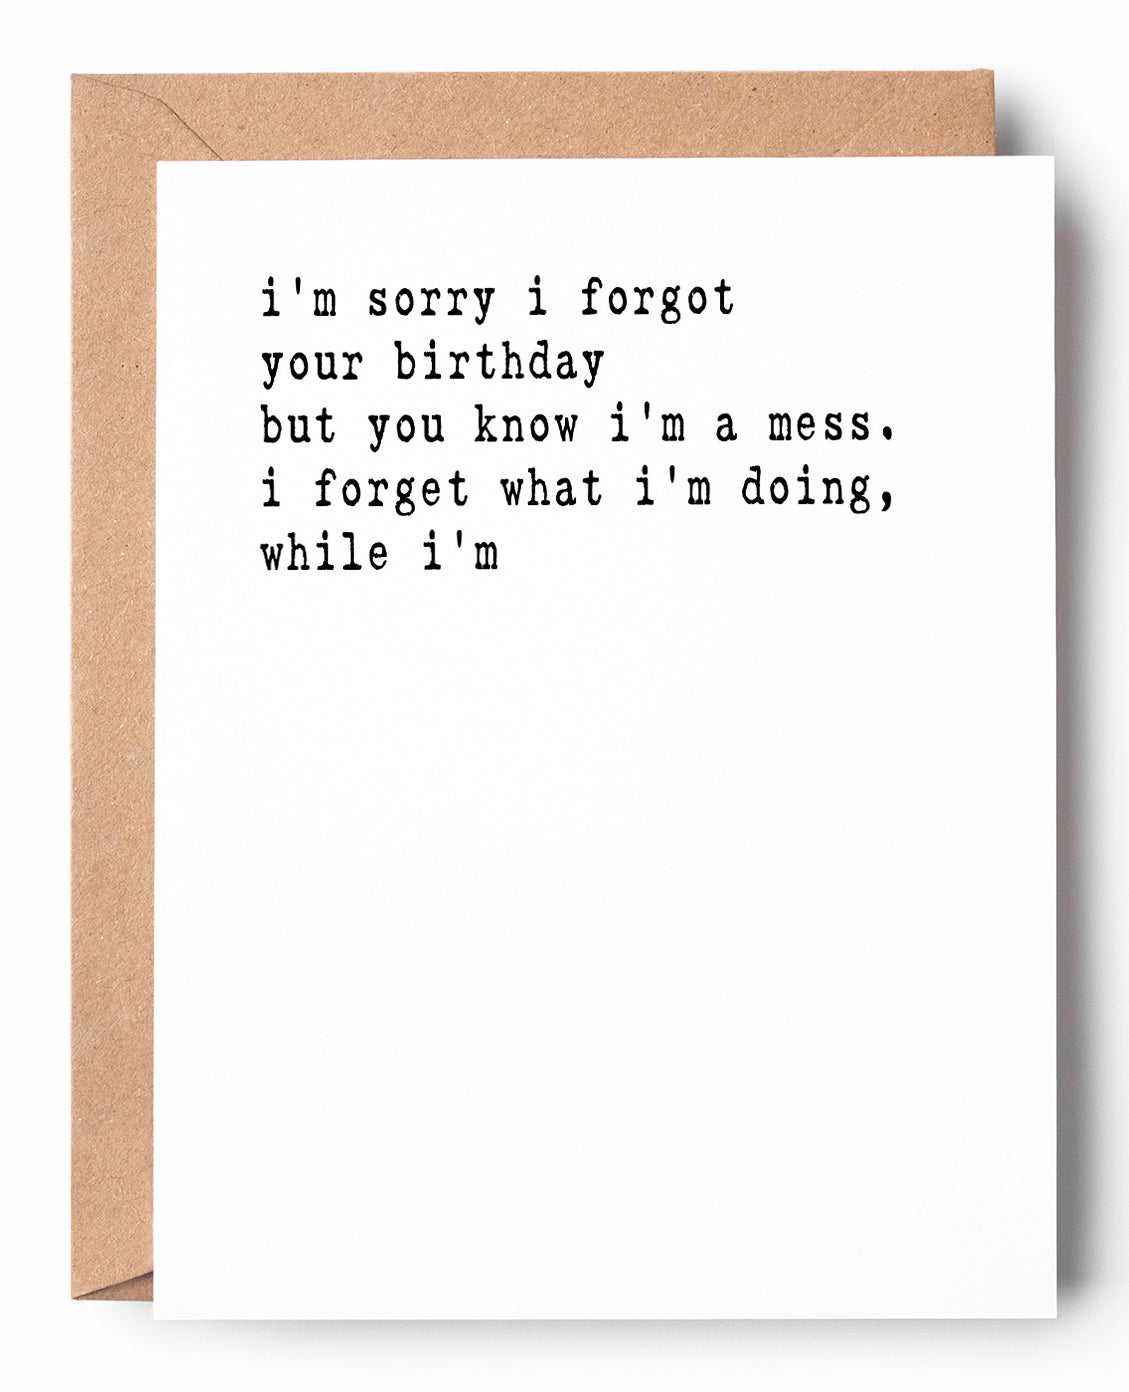 This funny letterpress belated birthday card that says: I'm sorry I forgot your birthday but you know I'm a mess. I forget what I'm doing, while I'm